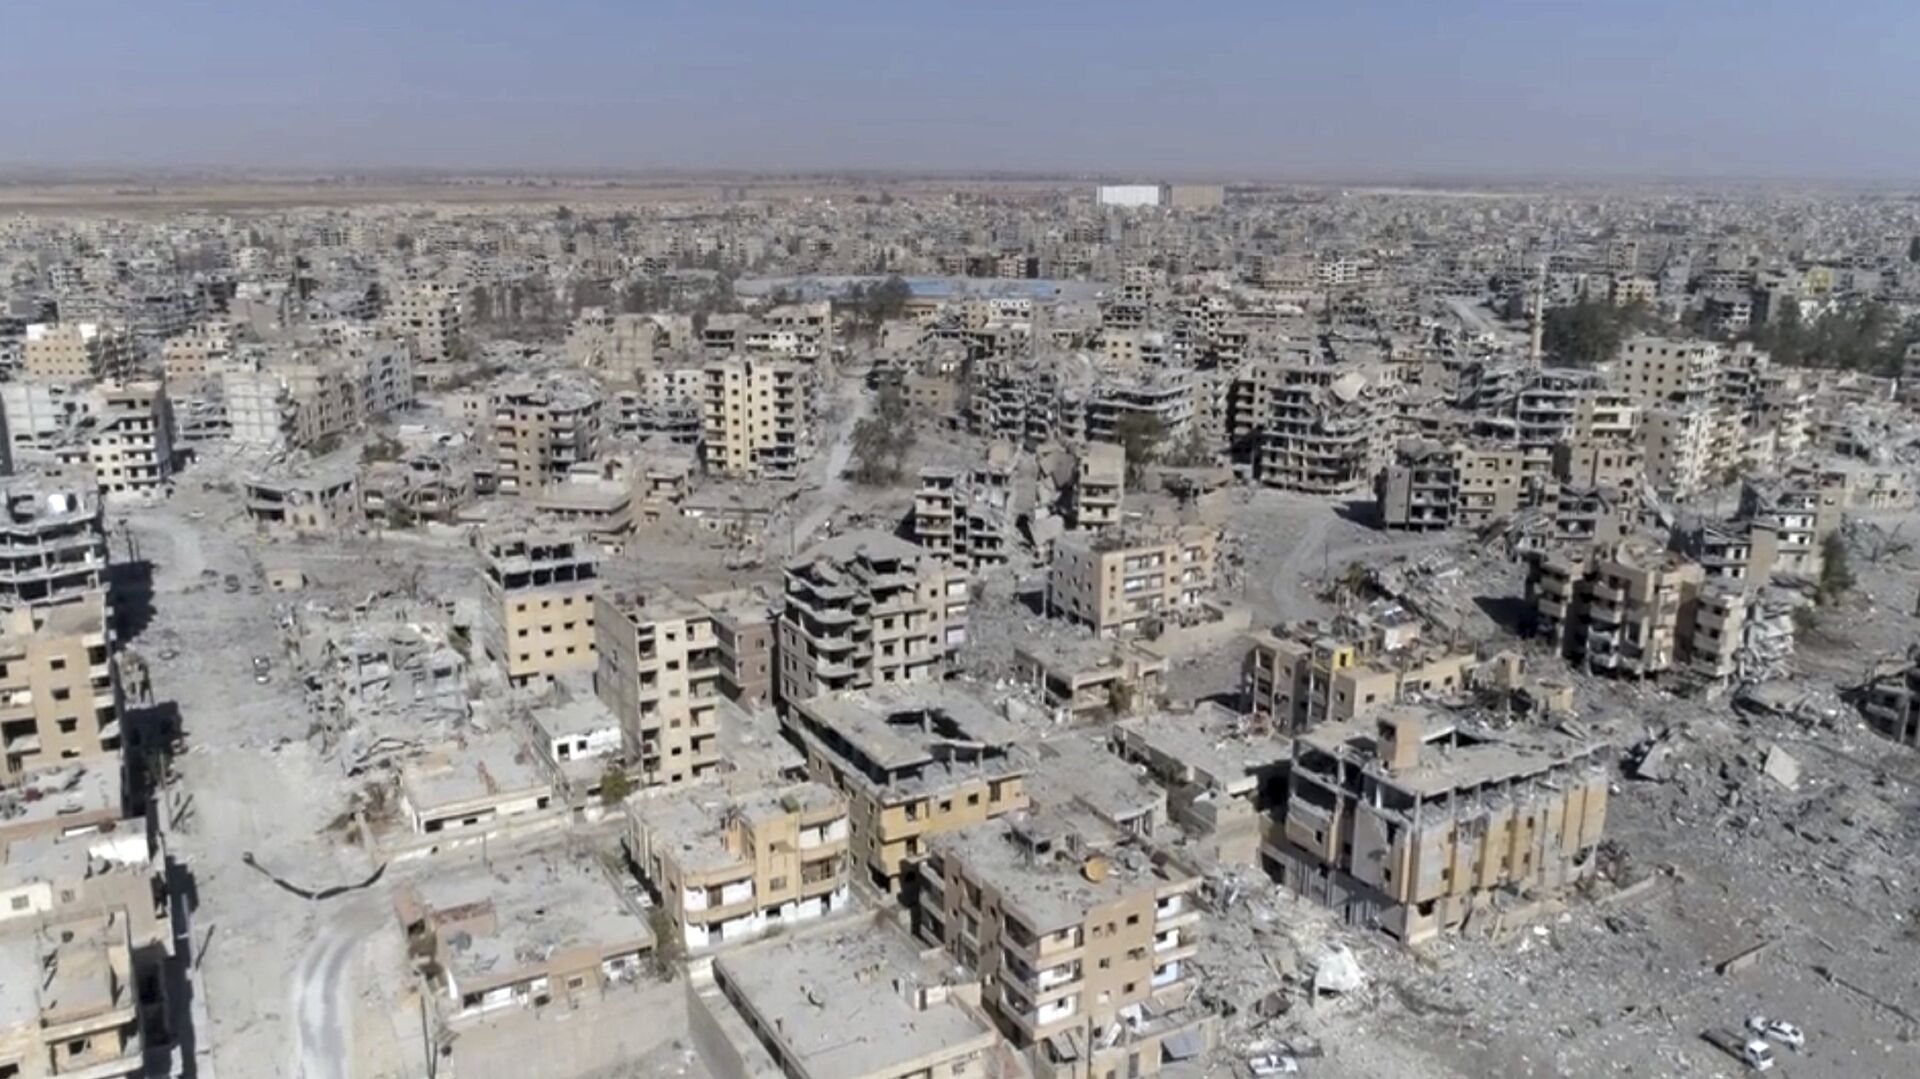 (File) This Thursday, Oct. 19, 2017 frame grab made from drone video shows damaged buildings in Raqqa, Syria - Sputnik International, 1920, 25.03.2022